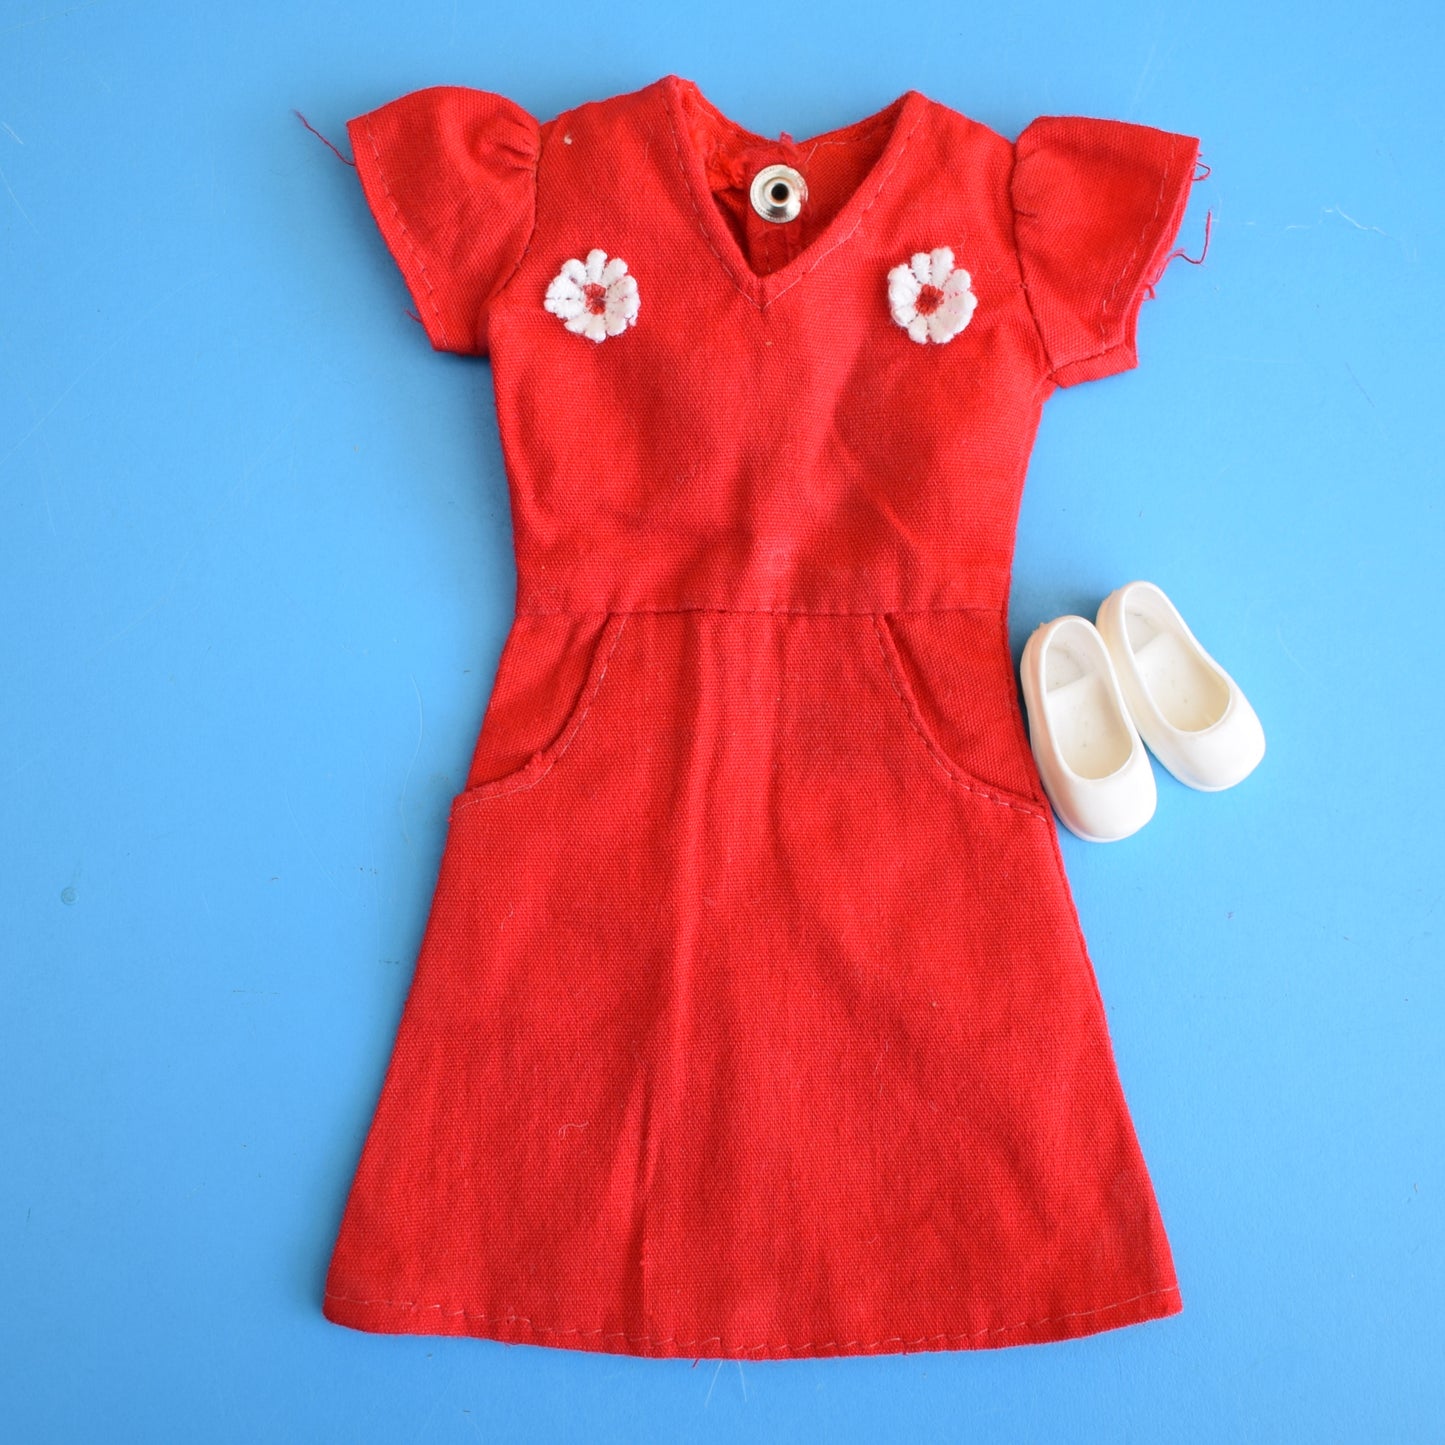 Vintage 1970s Sindy Outfits- All 1976